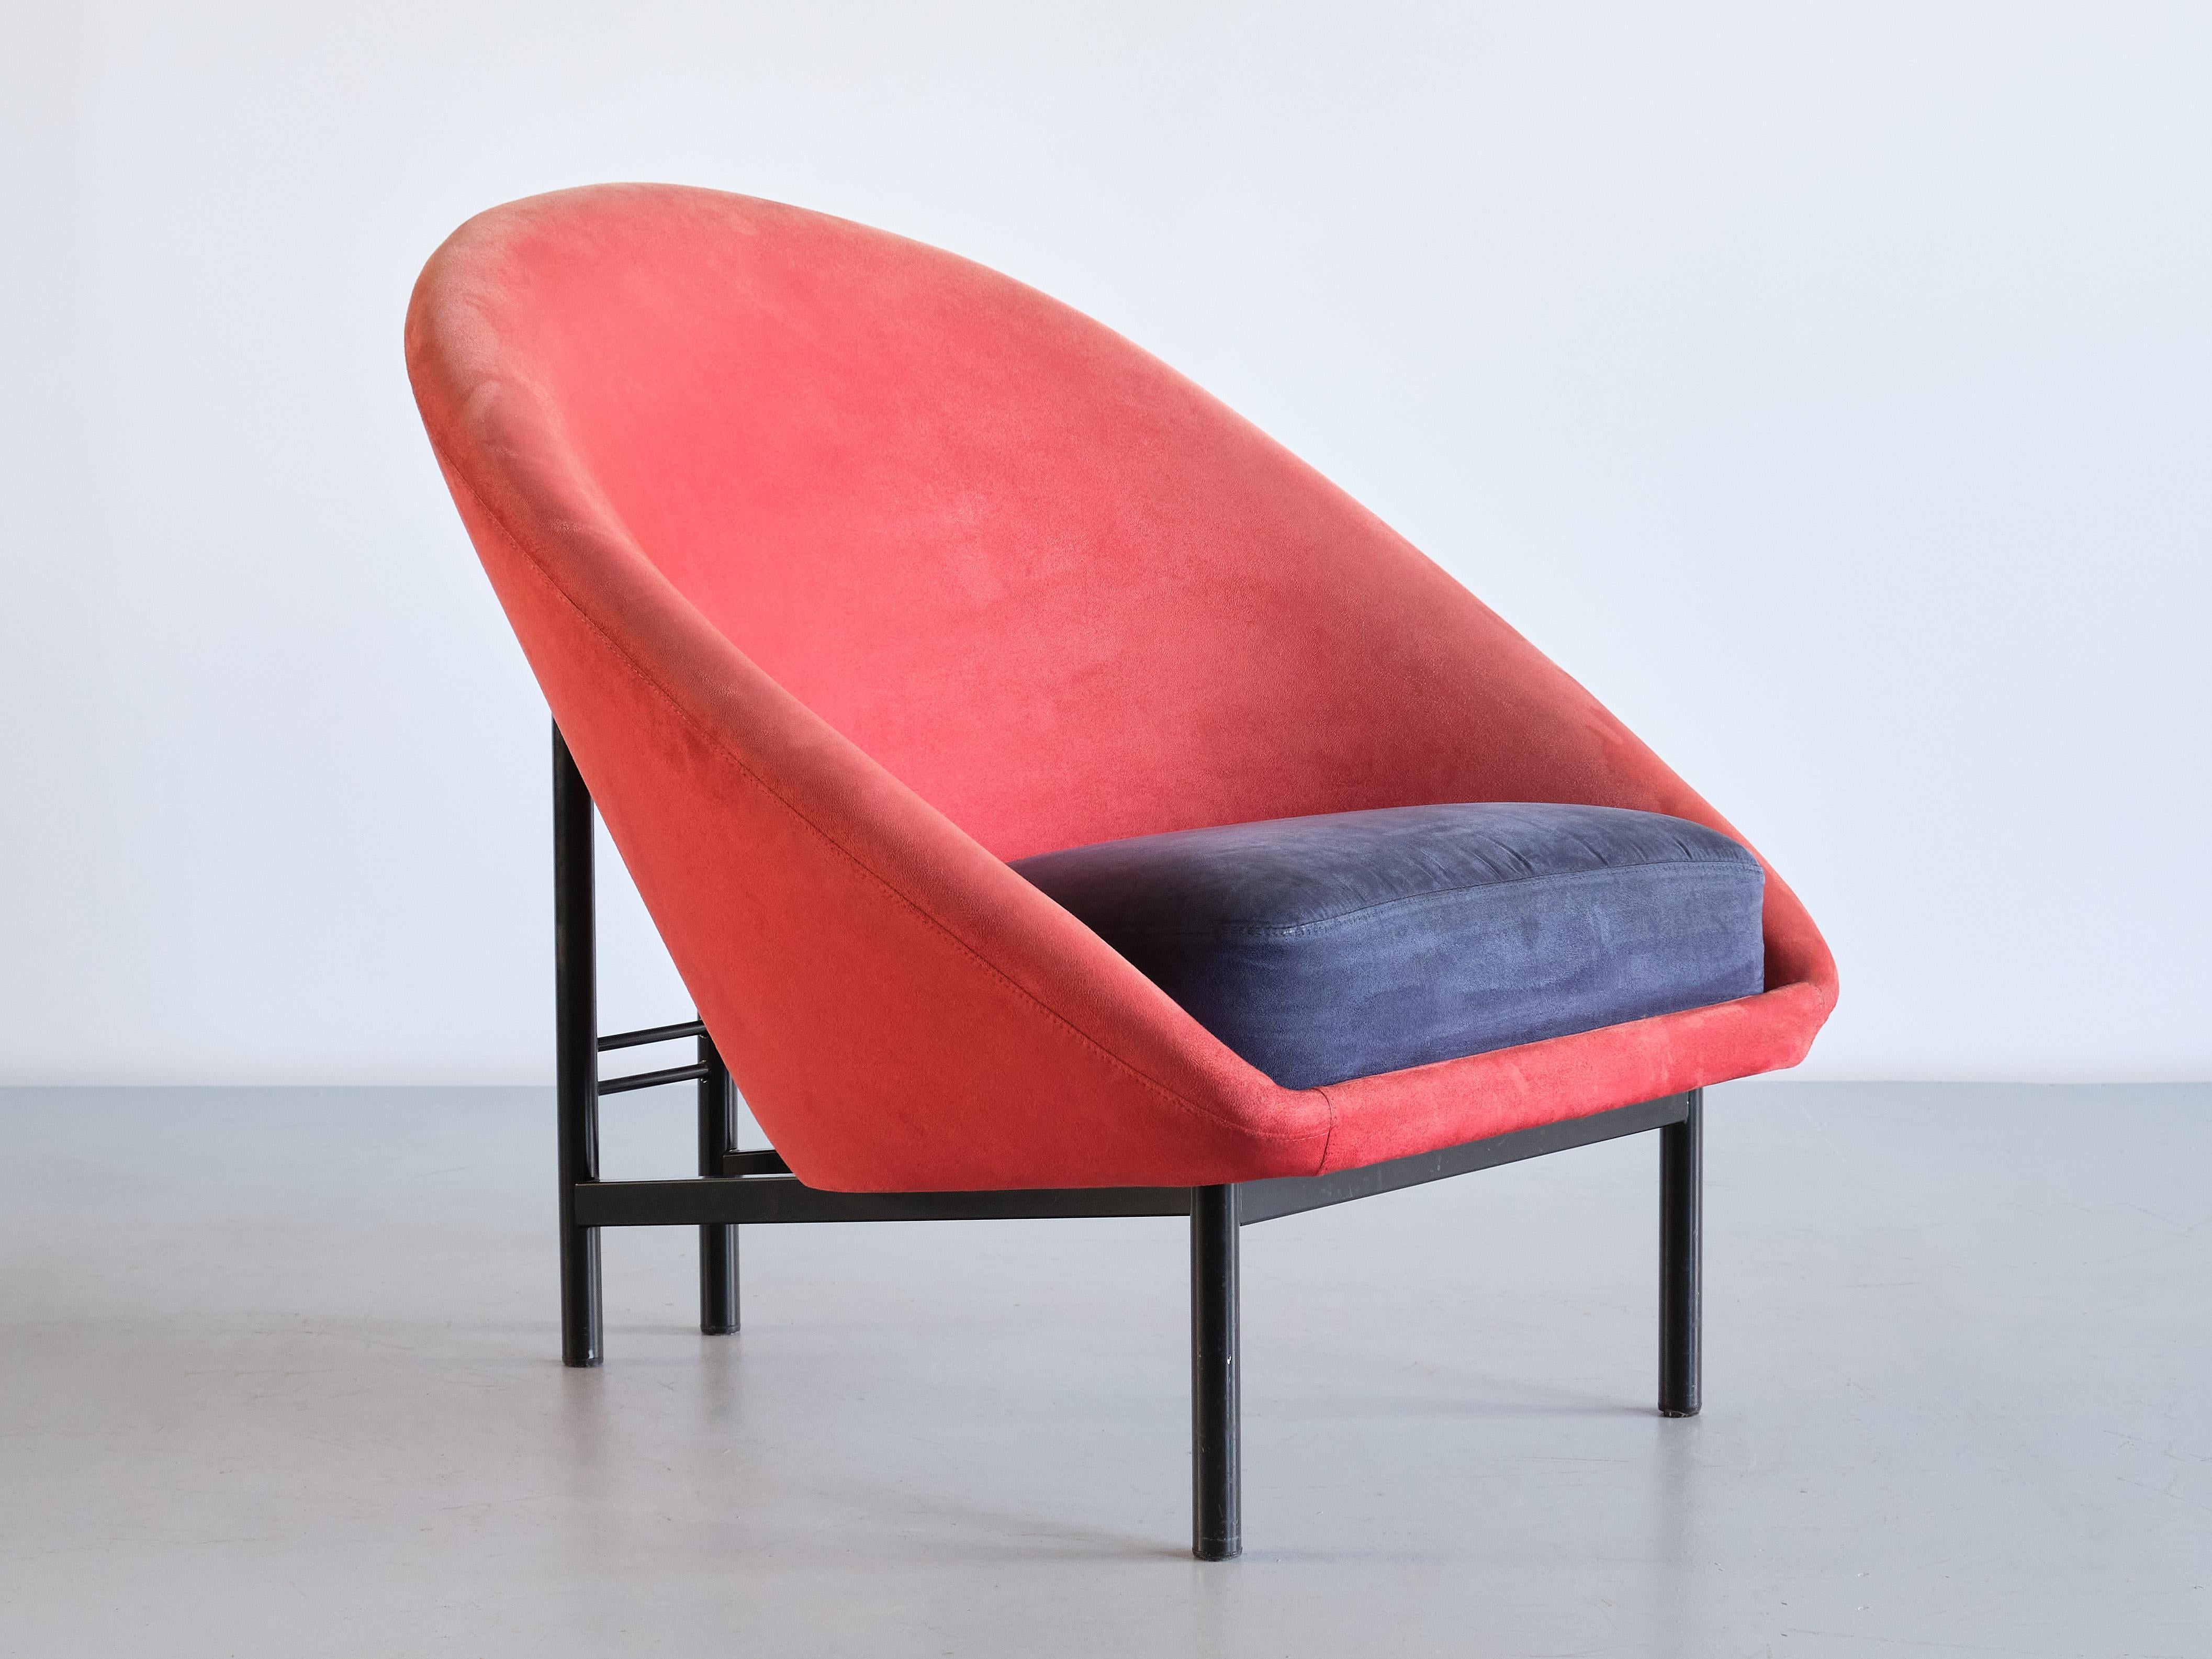 Pair of Theo Ruth 'F815' Lounge Chairs, Artifort, Netherlands, 1960s For Sale 2